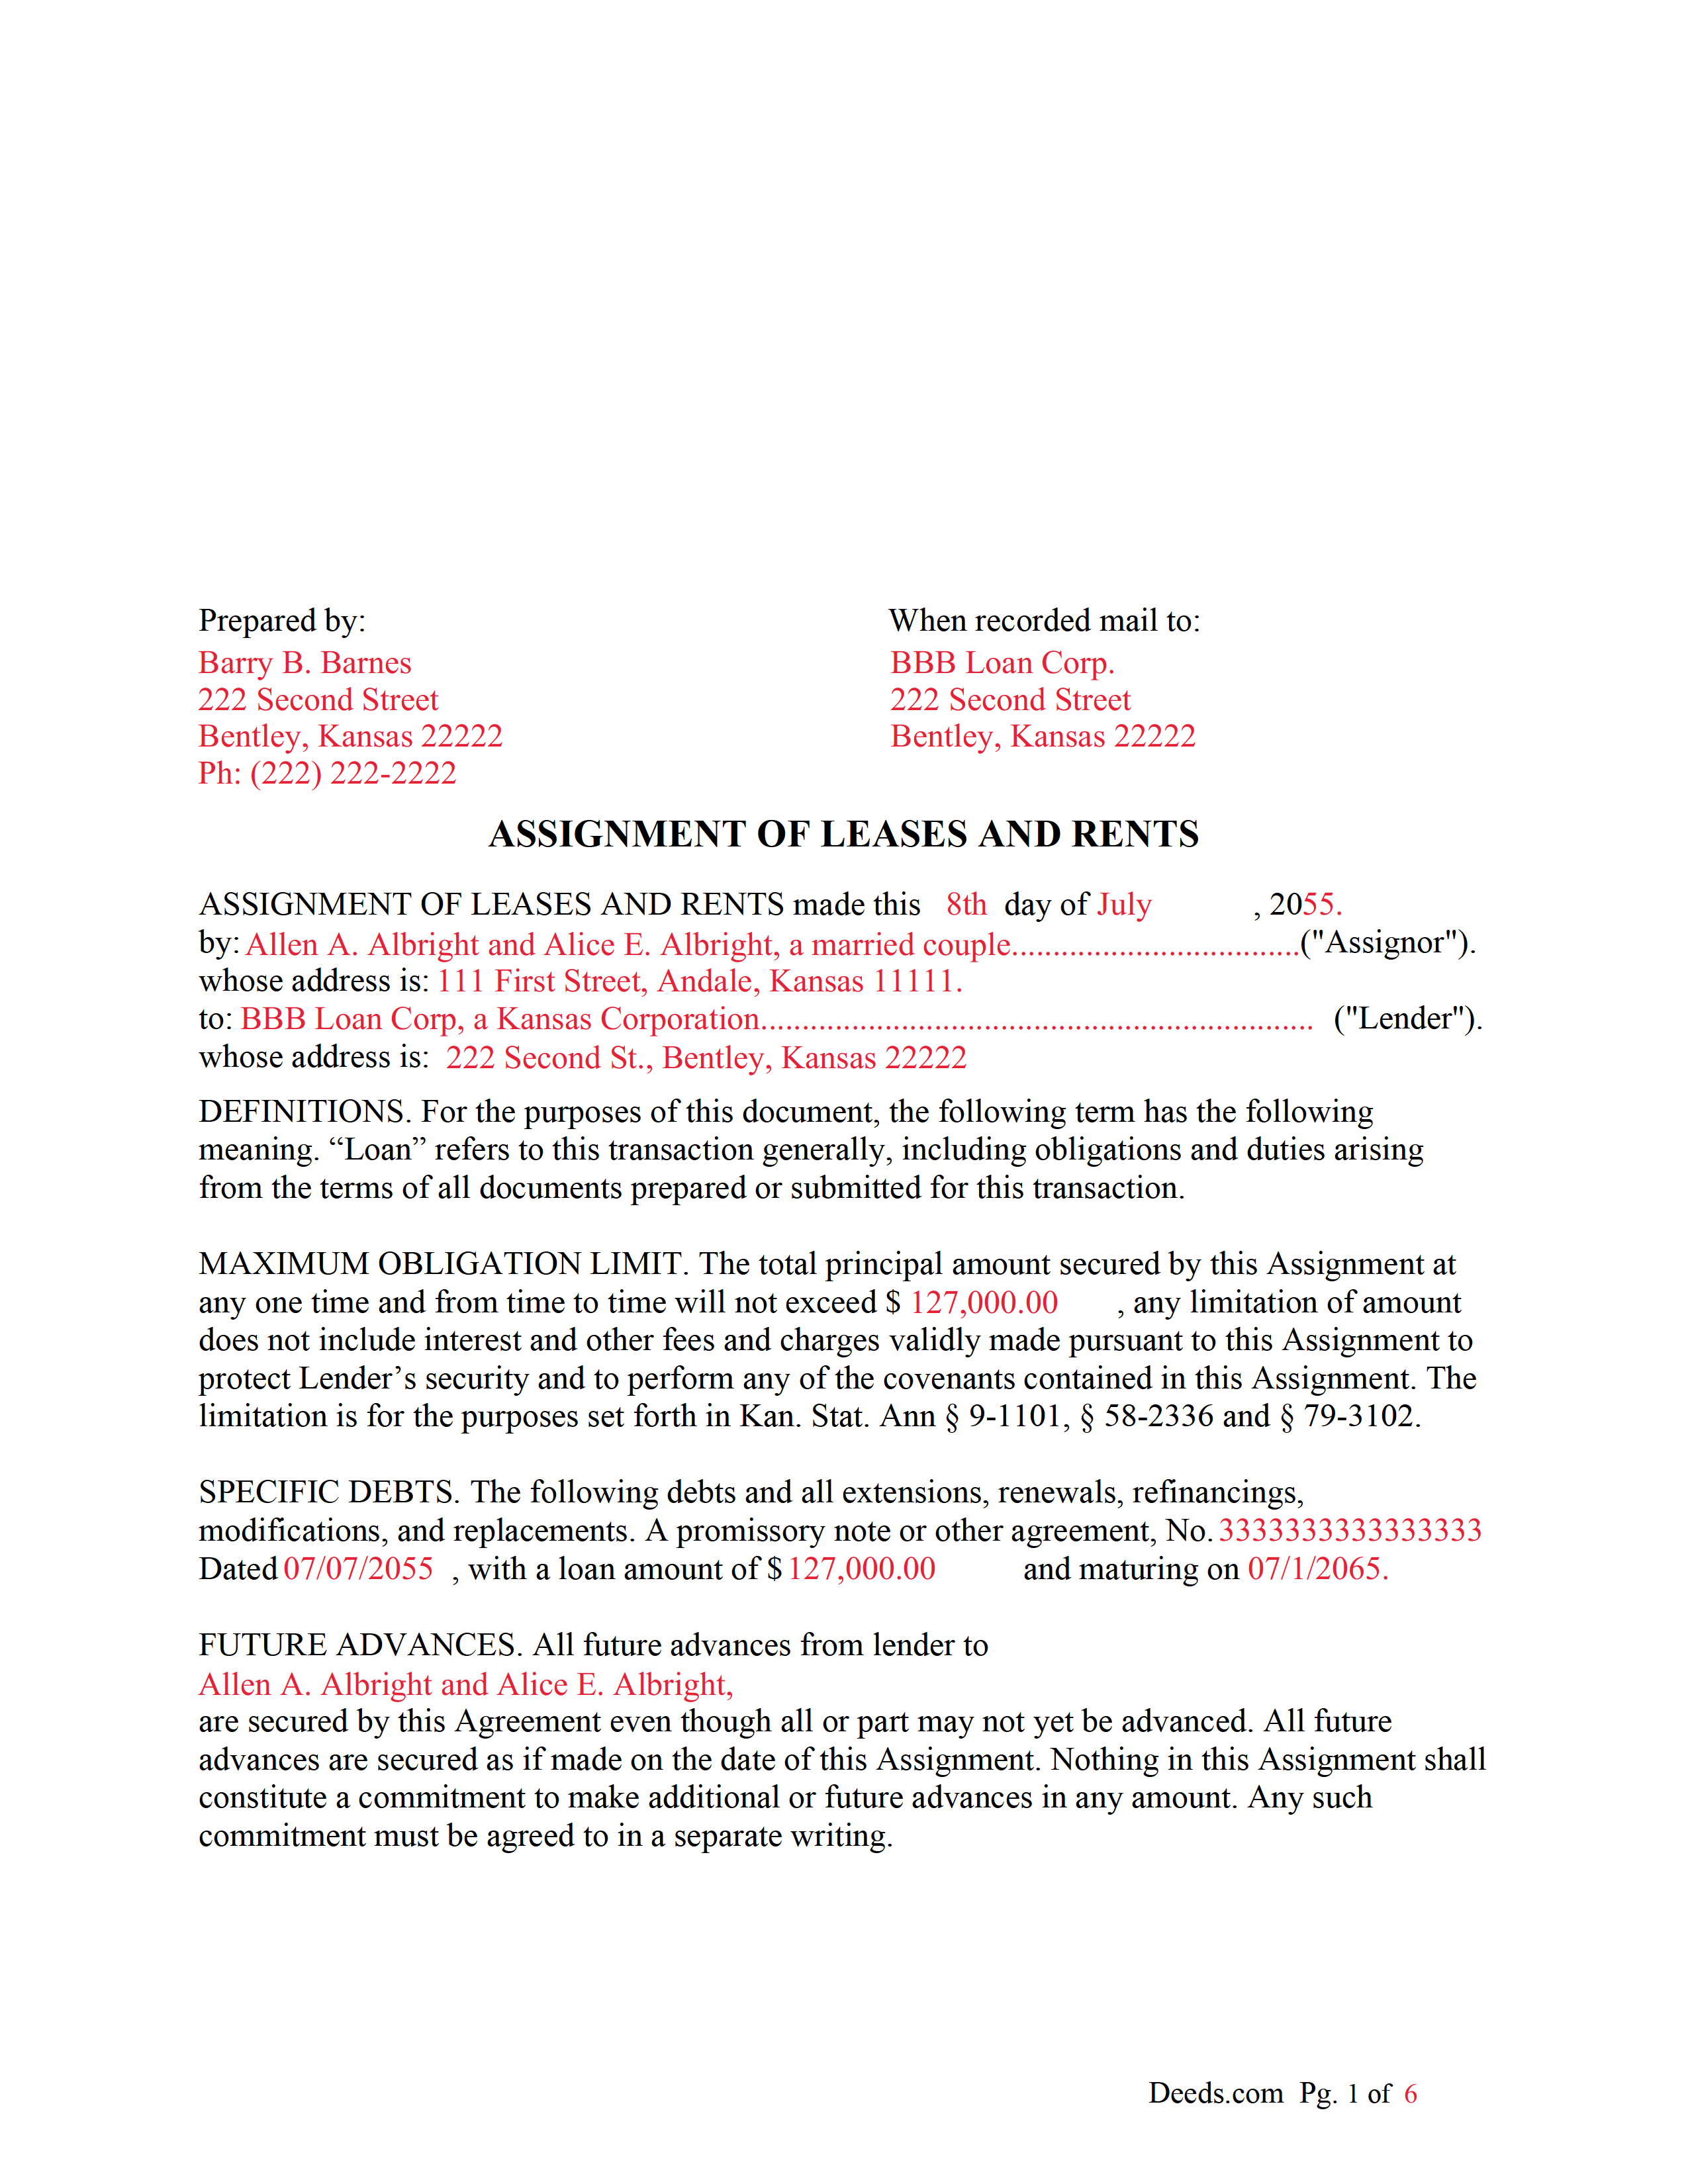 Greeley County Completed Example of the Assignment of Leases and Rents Document